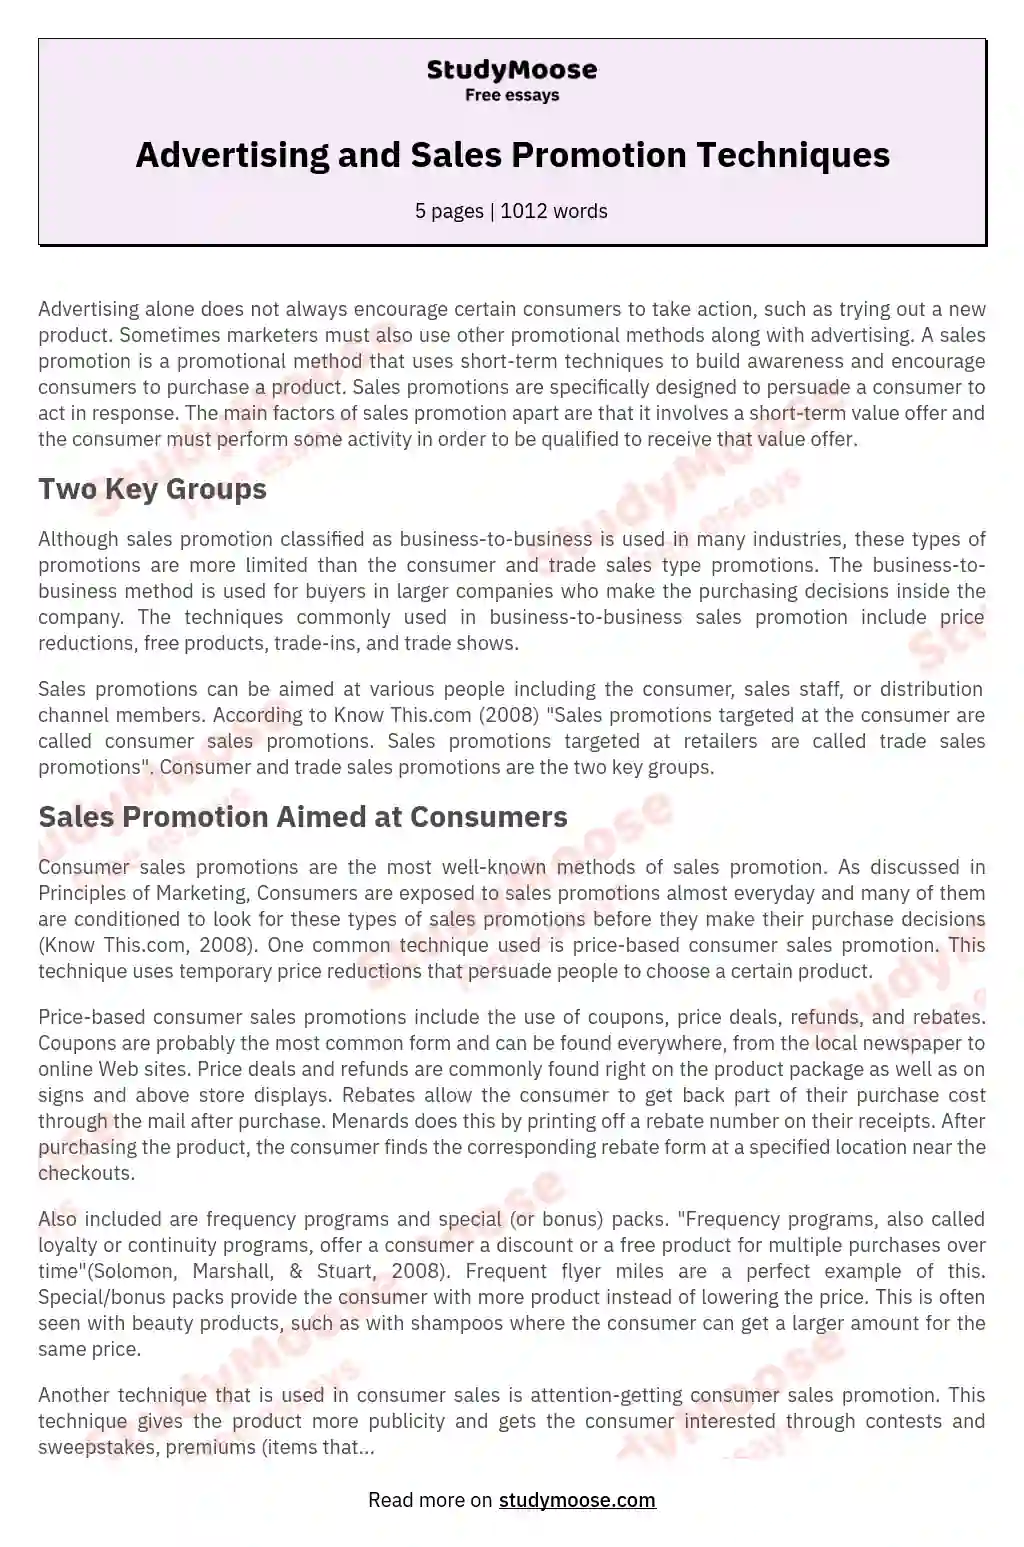 Advertising and Sales Promotion Techniques essay